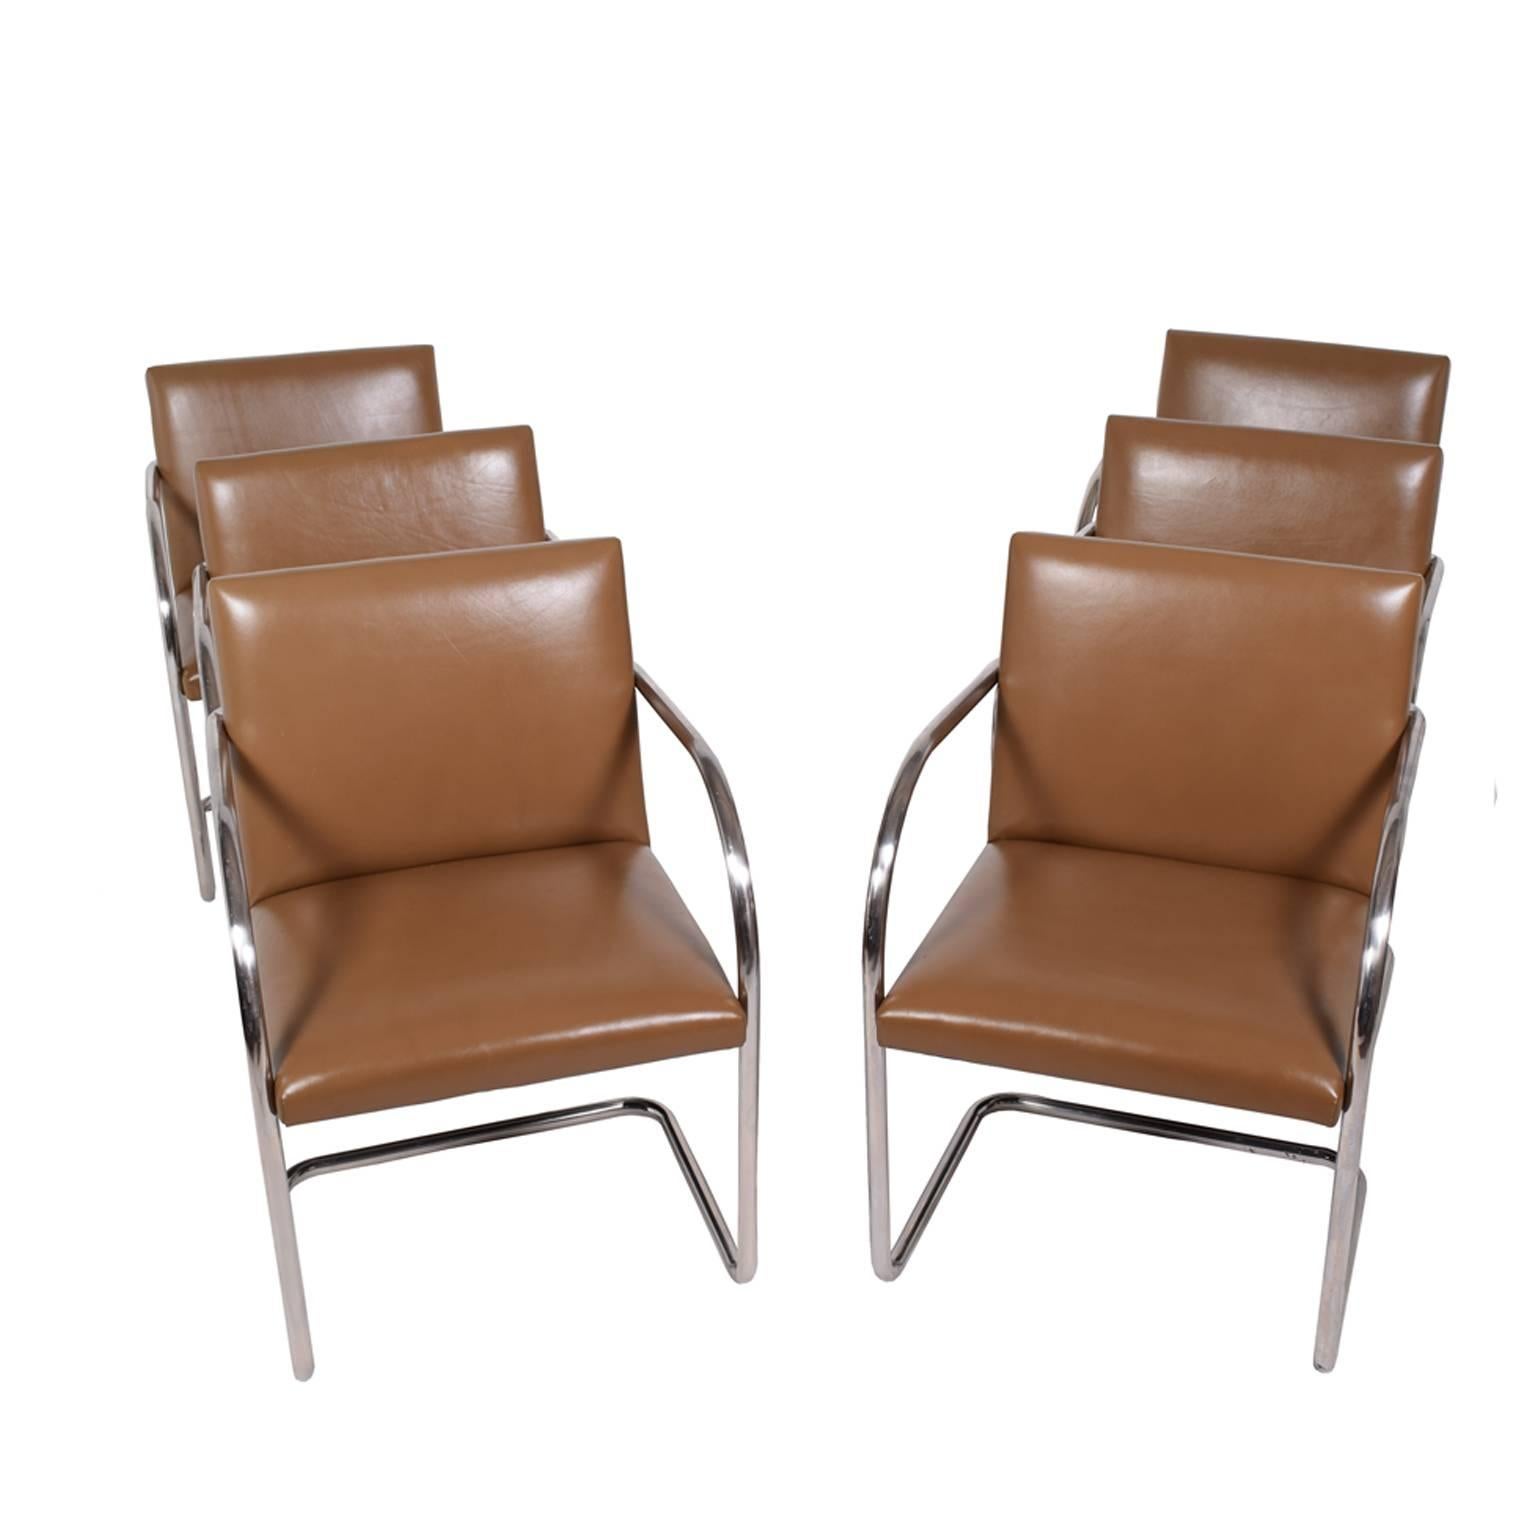 American Set of Six Brno Chairs by Mies van der Rohe for Knoll